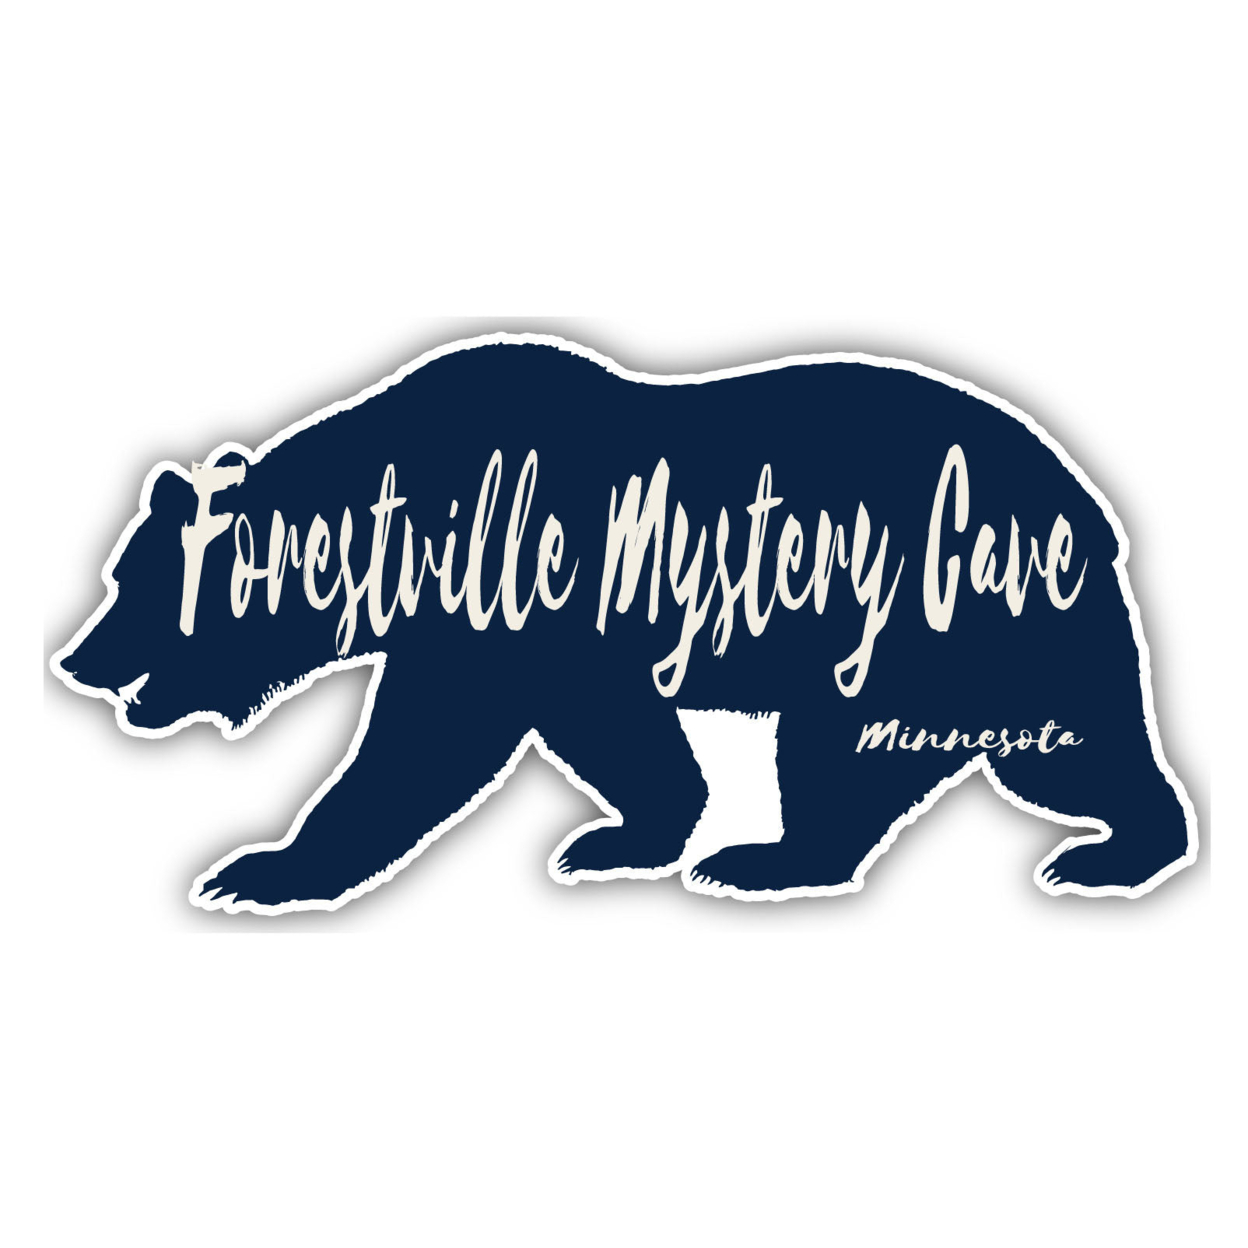 Forestville Mystery Cave Minnesota Souvenir Decorative Stickers (Choose Theme And Size) - 4-Pack, 2-Inch, Bear